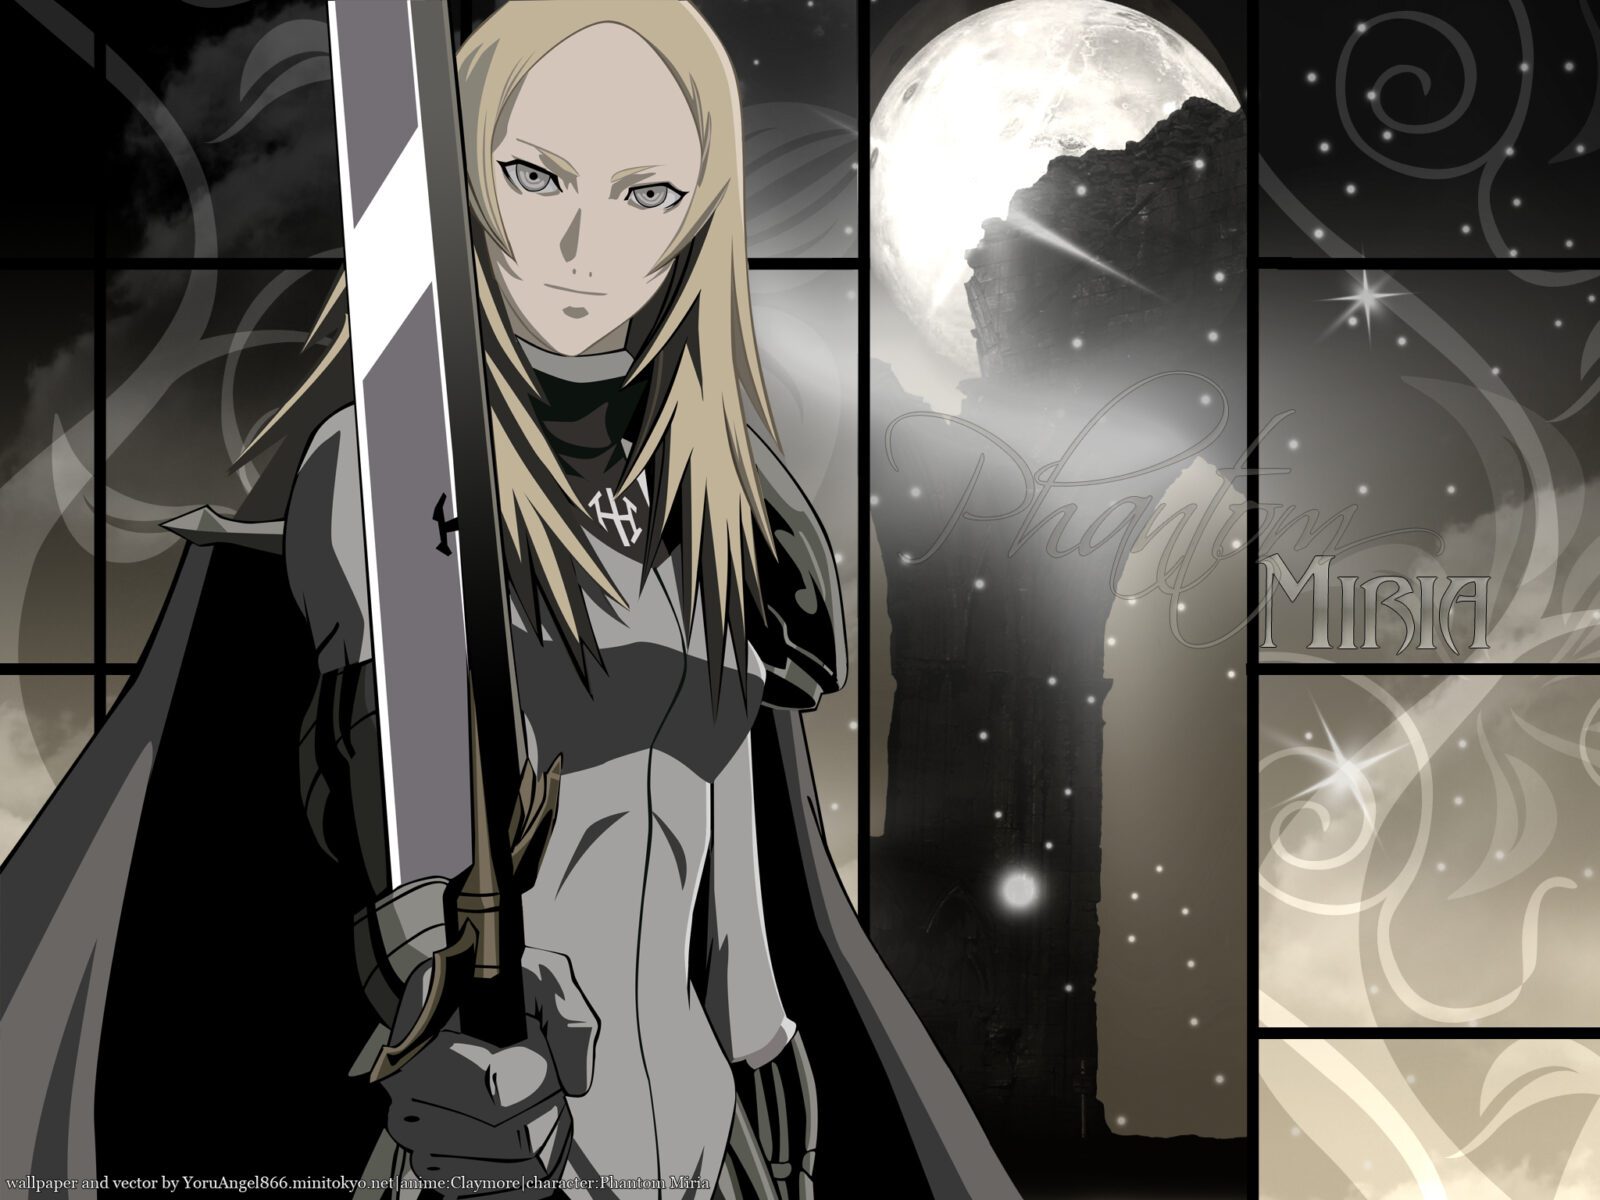 Experiencing the Journey: Does Claymore Have Good Animation?